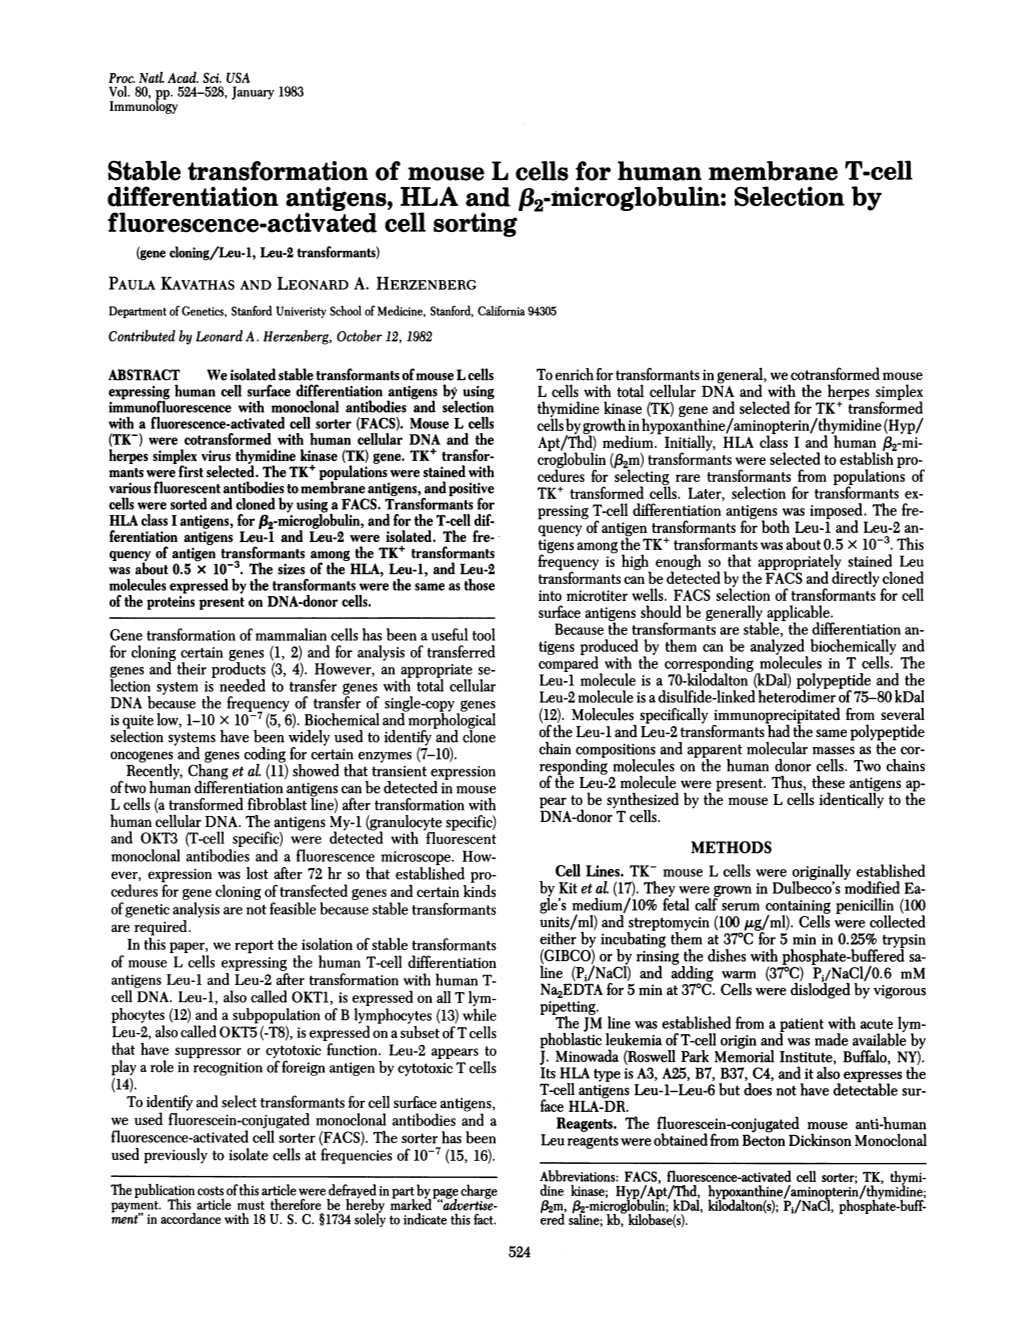 Differentiation Antigens, Hlaand .82-Microglobulin: Selection By